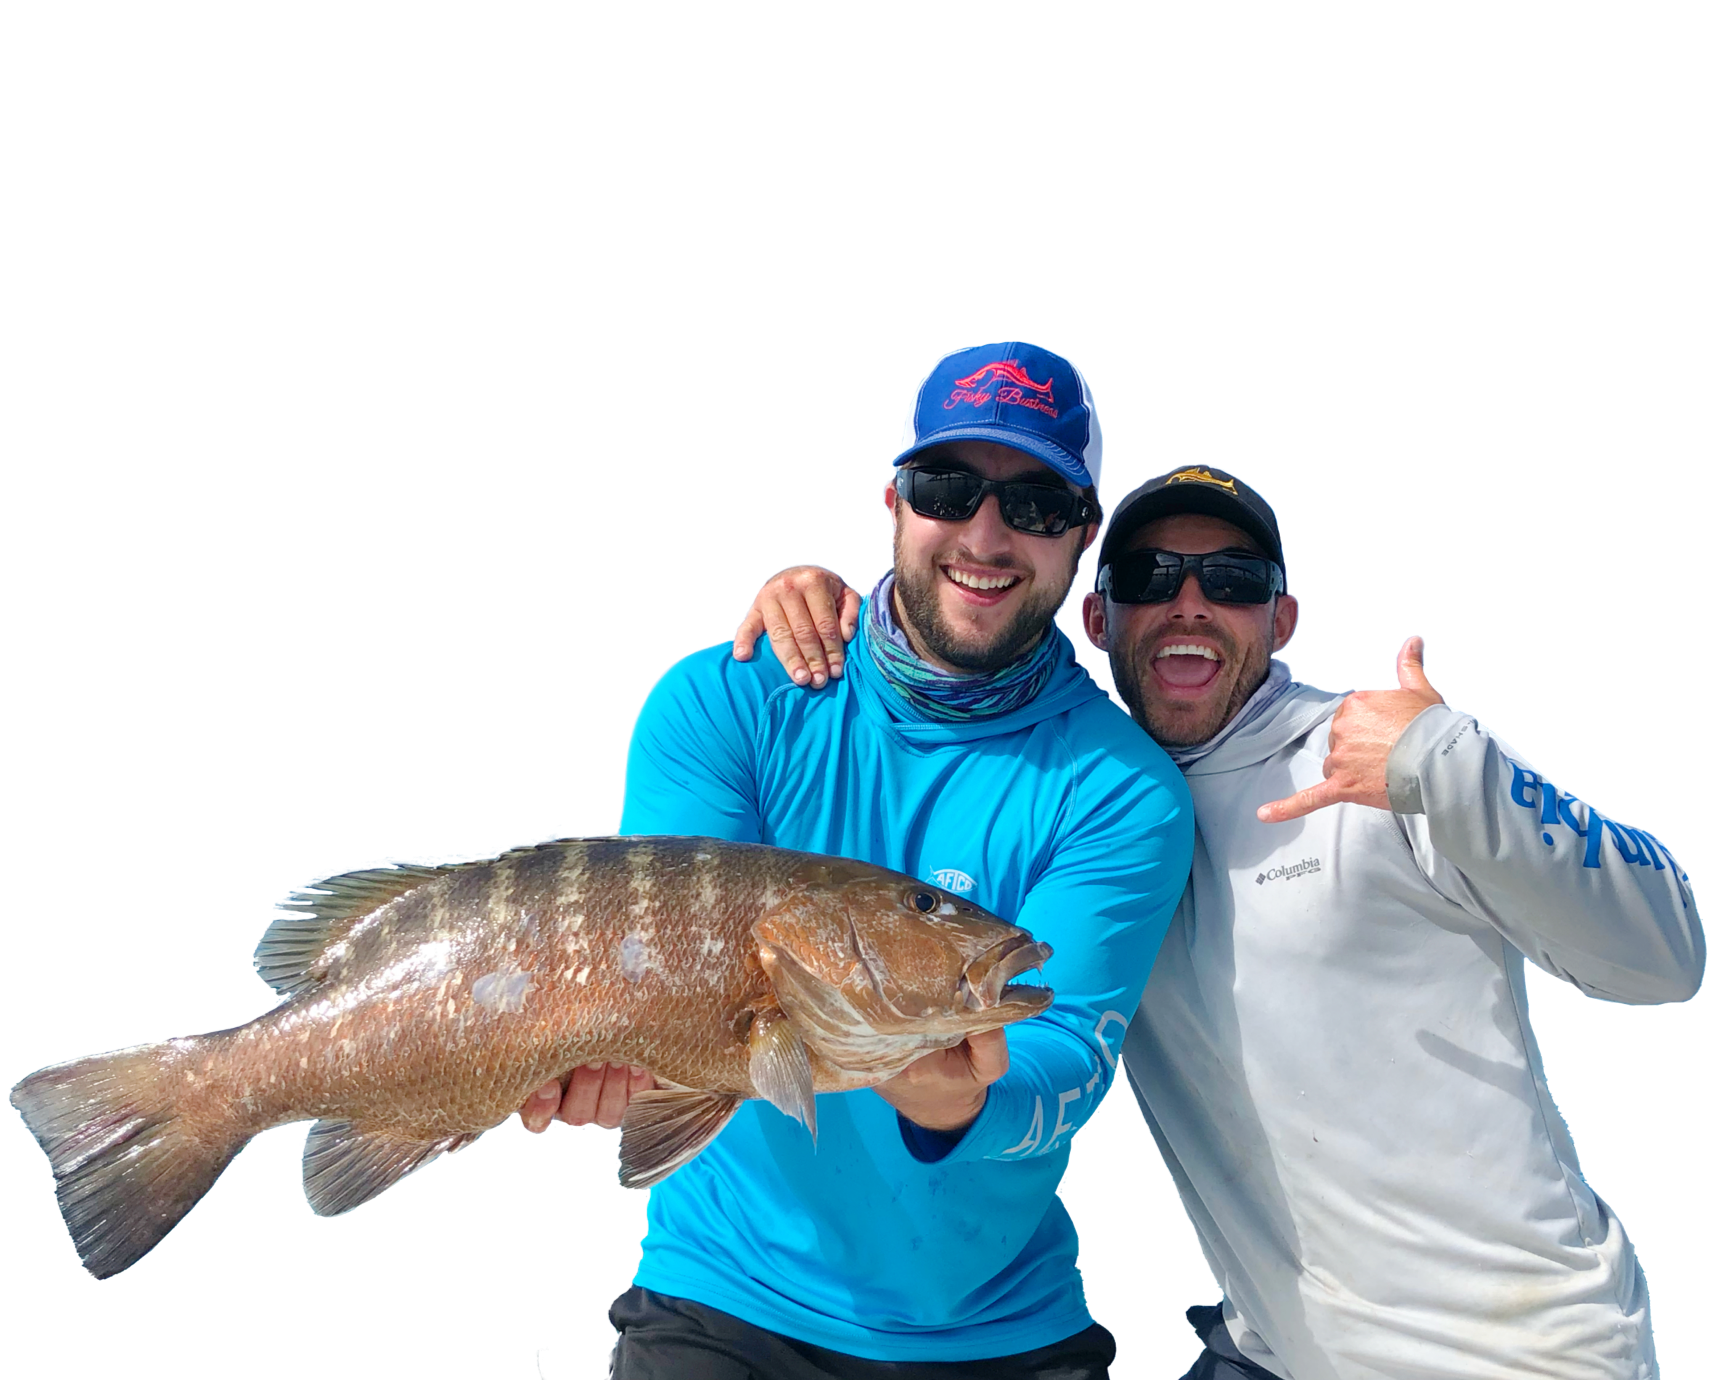 Adult male and Captain Drew posing with a fish, islamorada fishing charters